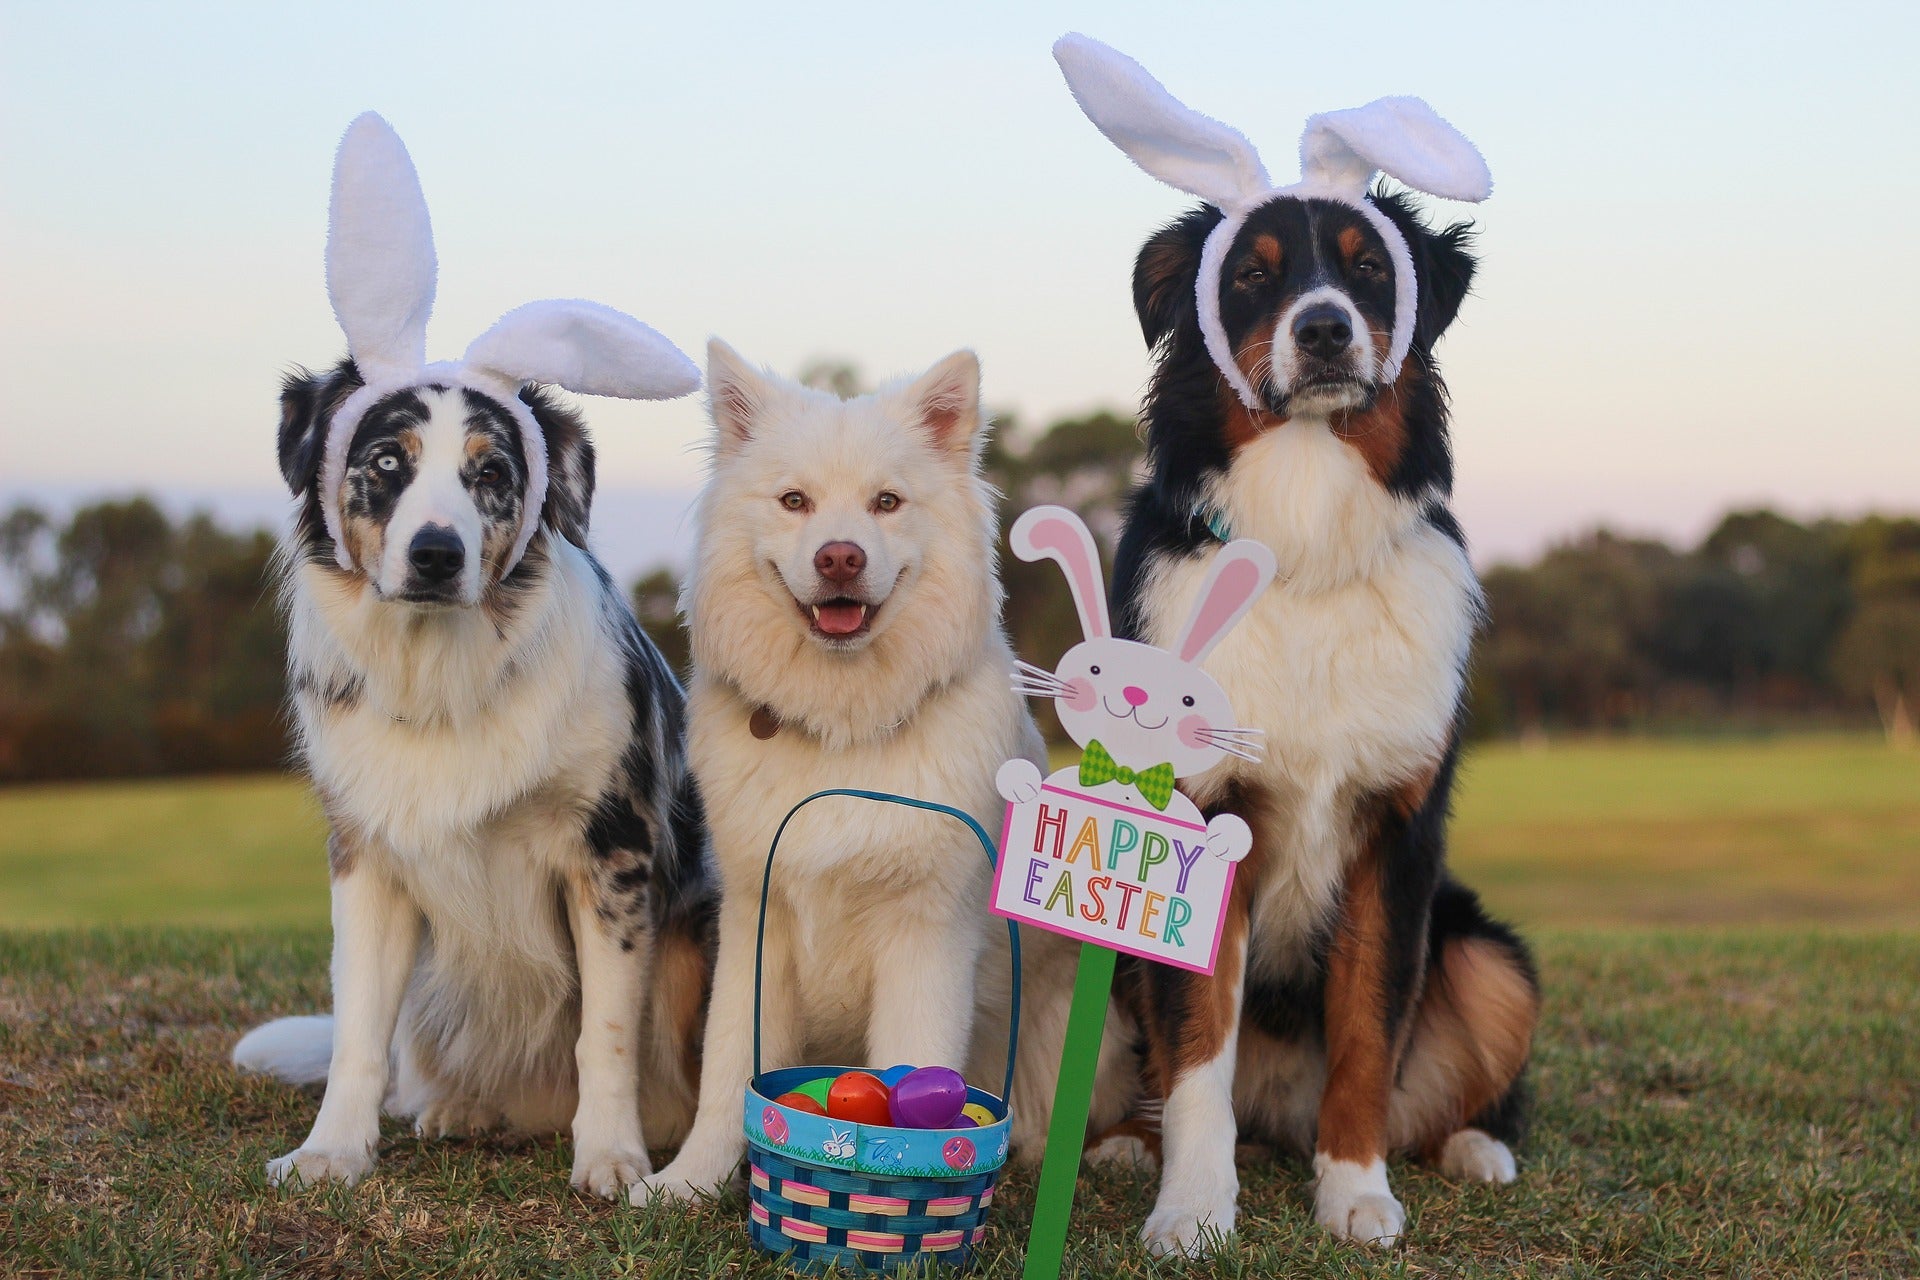 These dogs are ready for their Easter egg hunt!